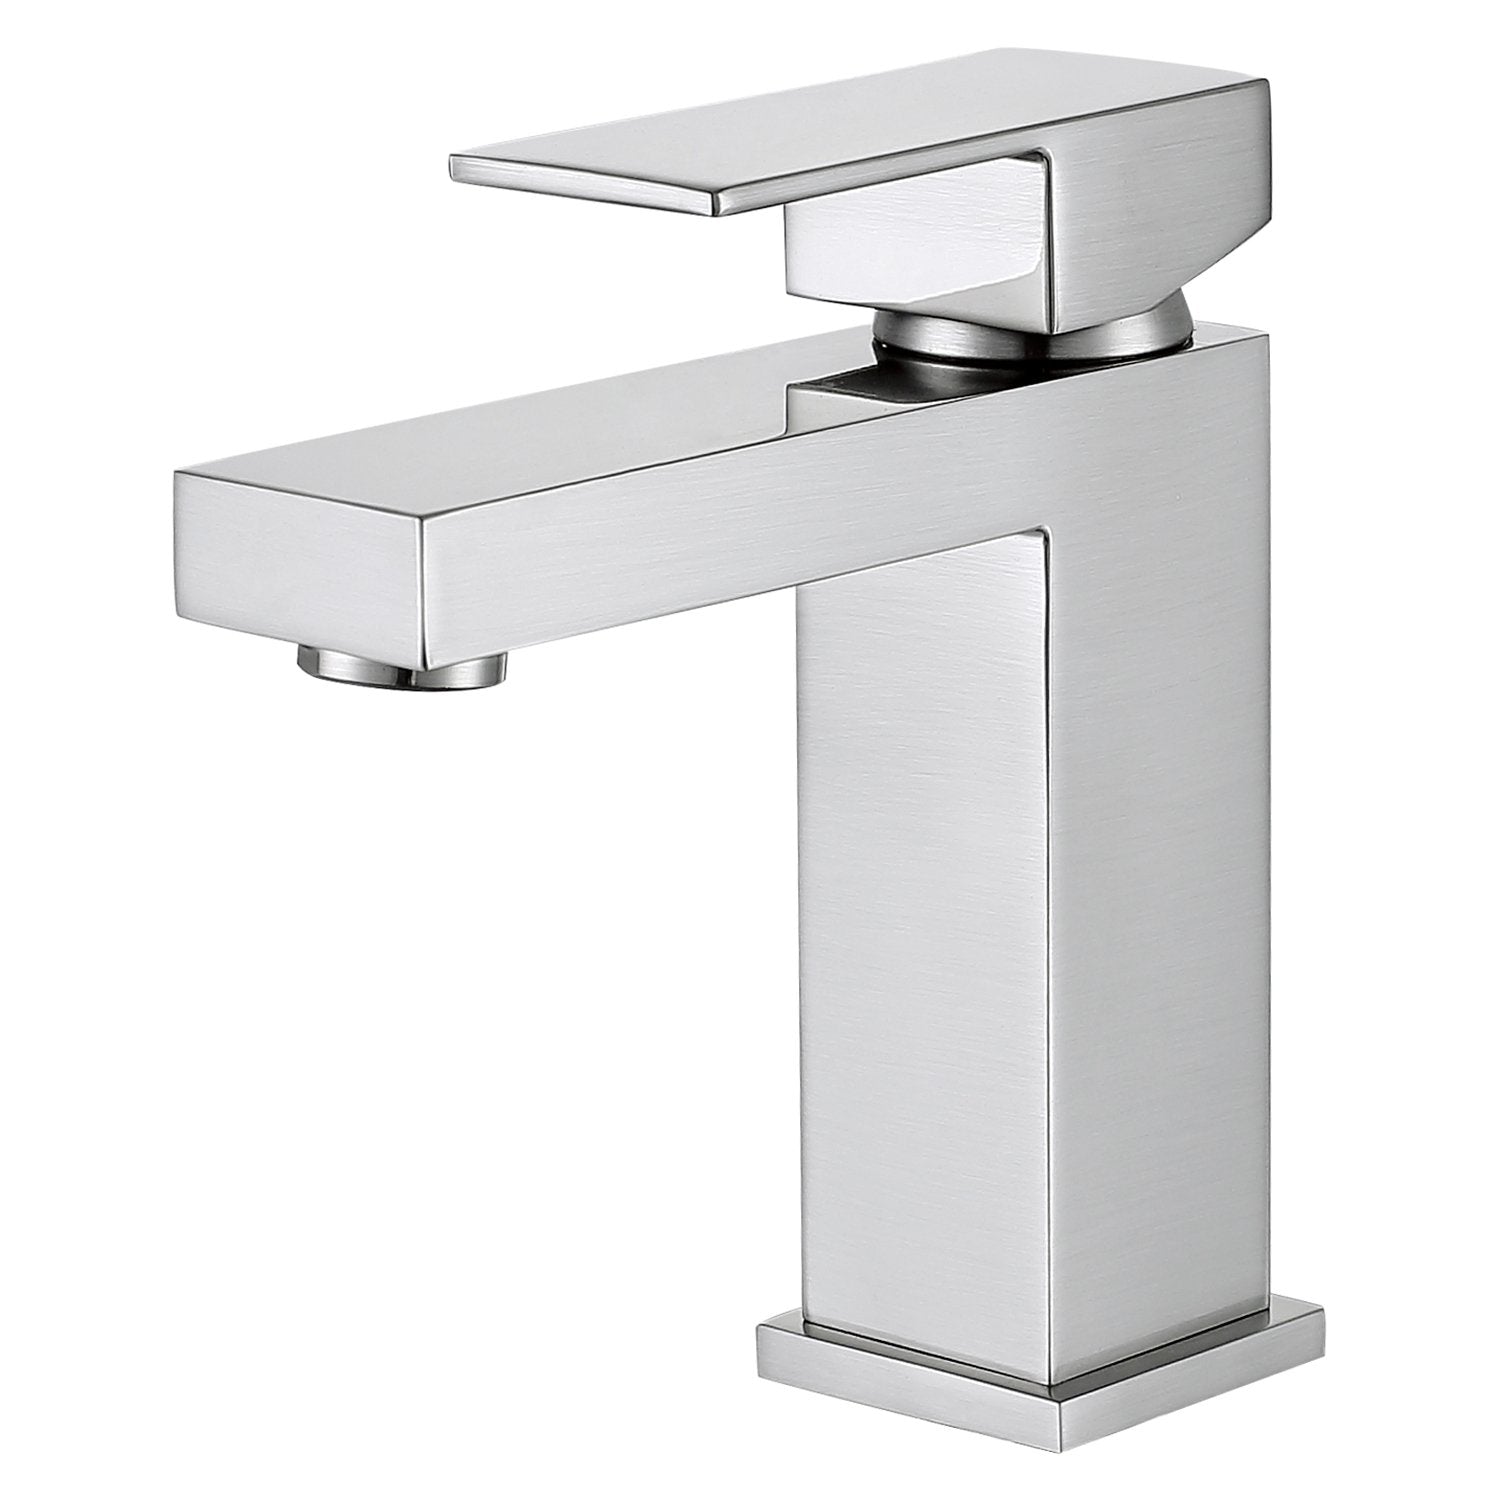 DAX Single Handle Bathroom Faucet, Brass Body, Brushed Nickel Finish, 4-5/16 x 6-1/2 Inches (DAX-6951A-BN)